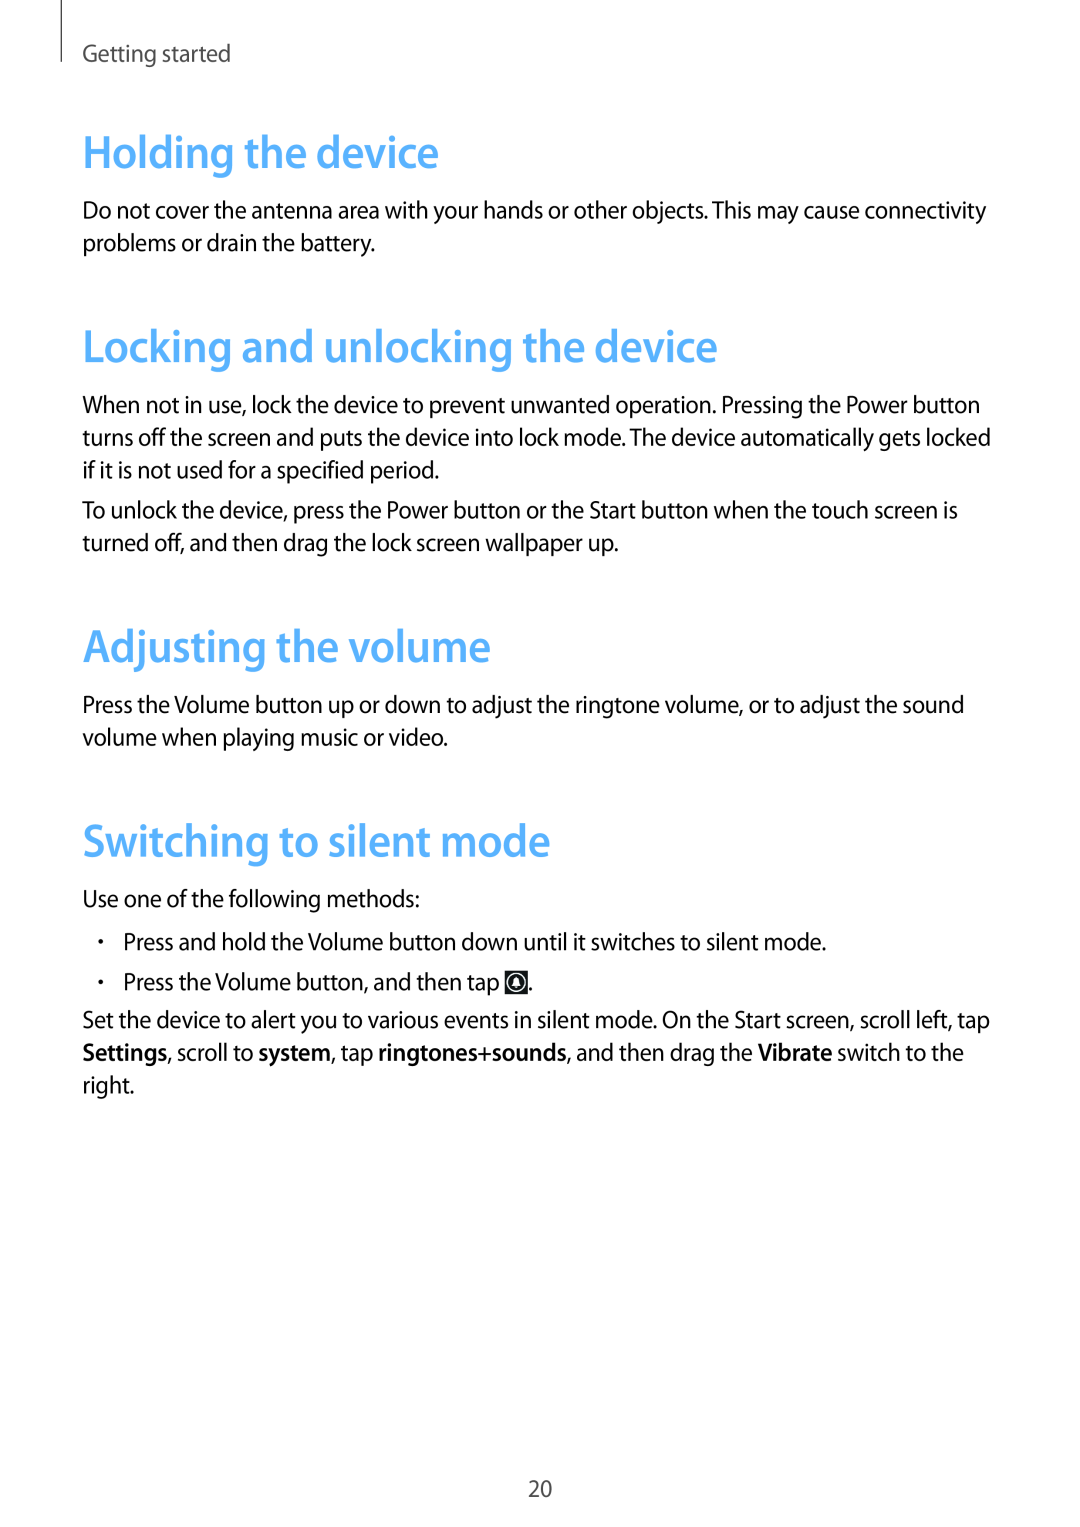 Samsung GT-I8750ALAATO manual Holding the device, Locking and unlocking the device, Adjusting the volume, Getting started 